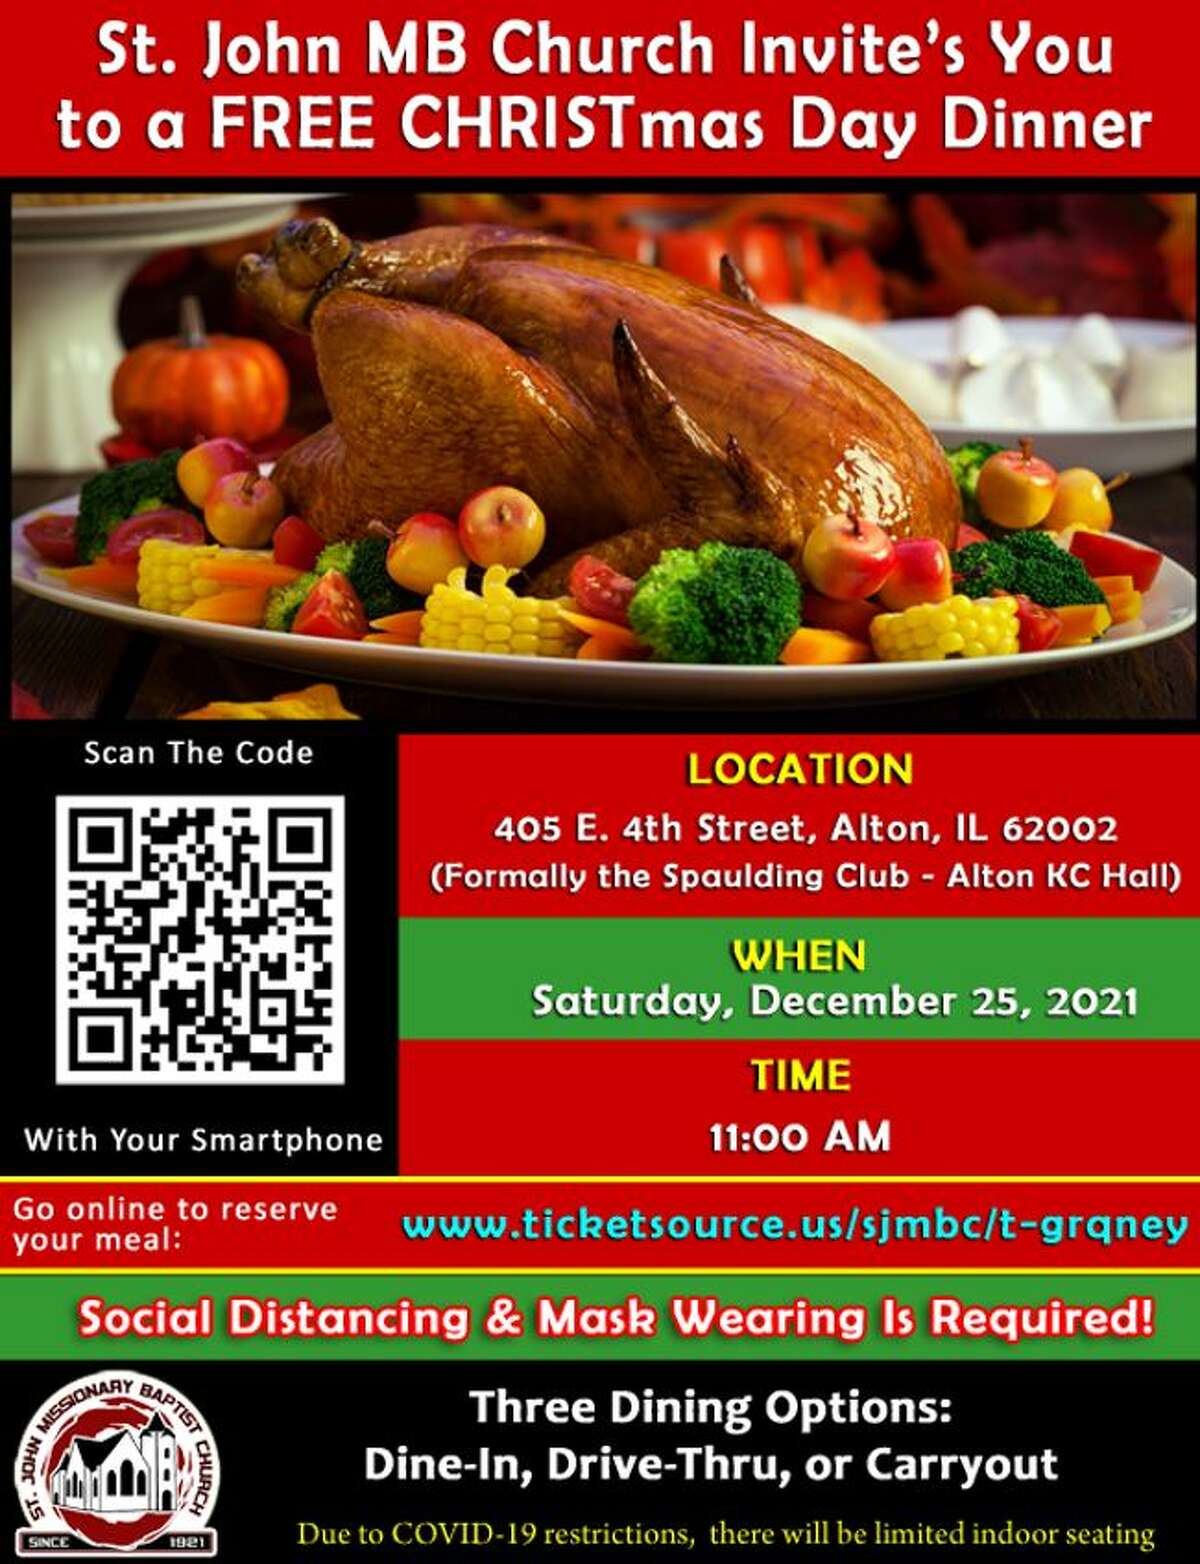 St. John Missionary Baptist Church will be hosting a free Christmas Dinner at the former Spaulding Club, 405 E. 4th St., at 11 a.m. Staurday, Dec. 25.